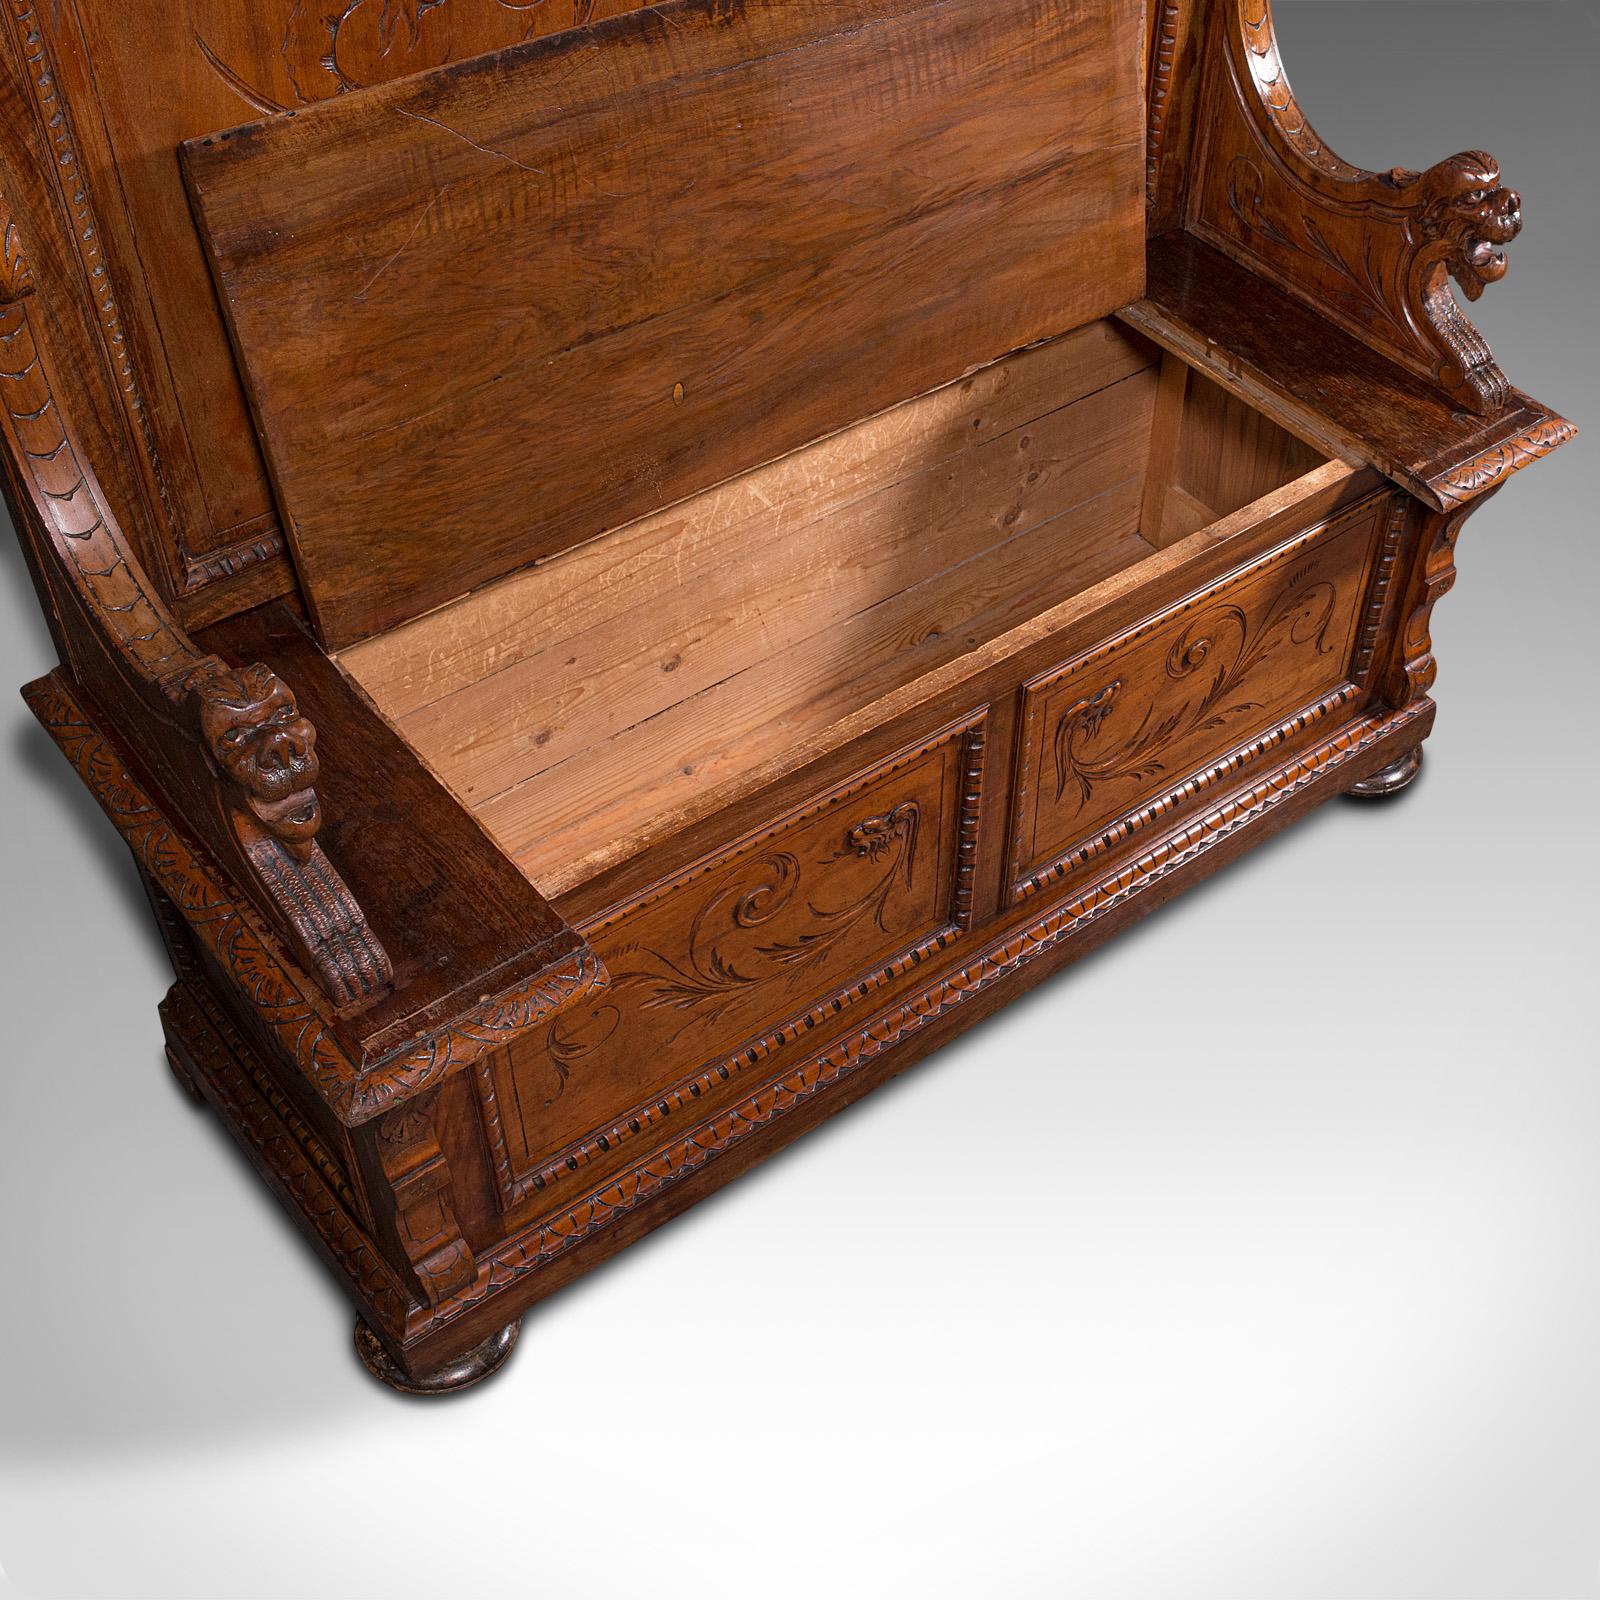 Large Antique Hall Settle, Italian, Pine, Walnut, Bench, Pew, Victorian, C.1850 For Sale 5